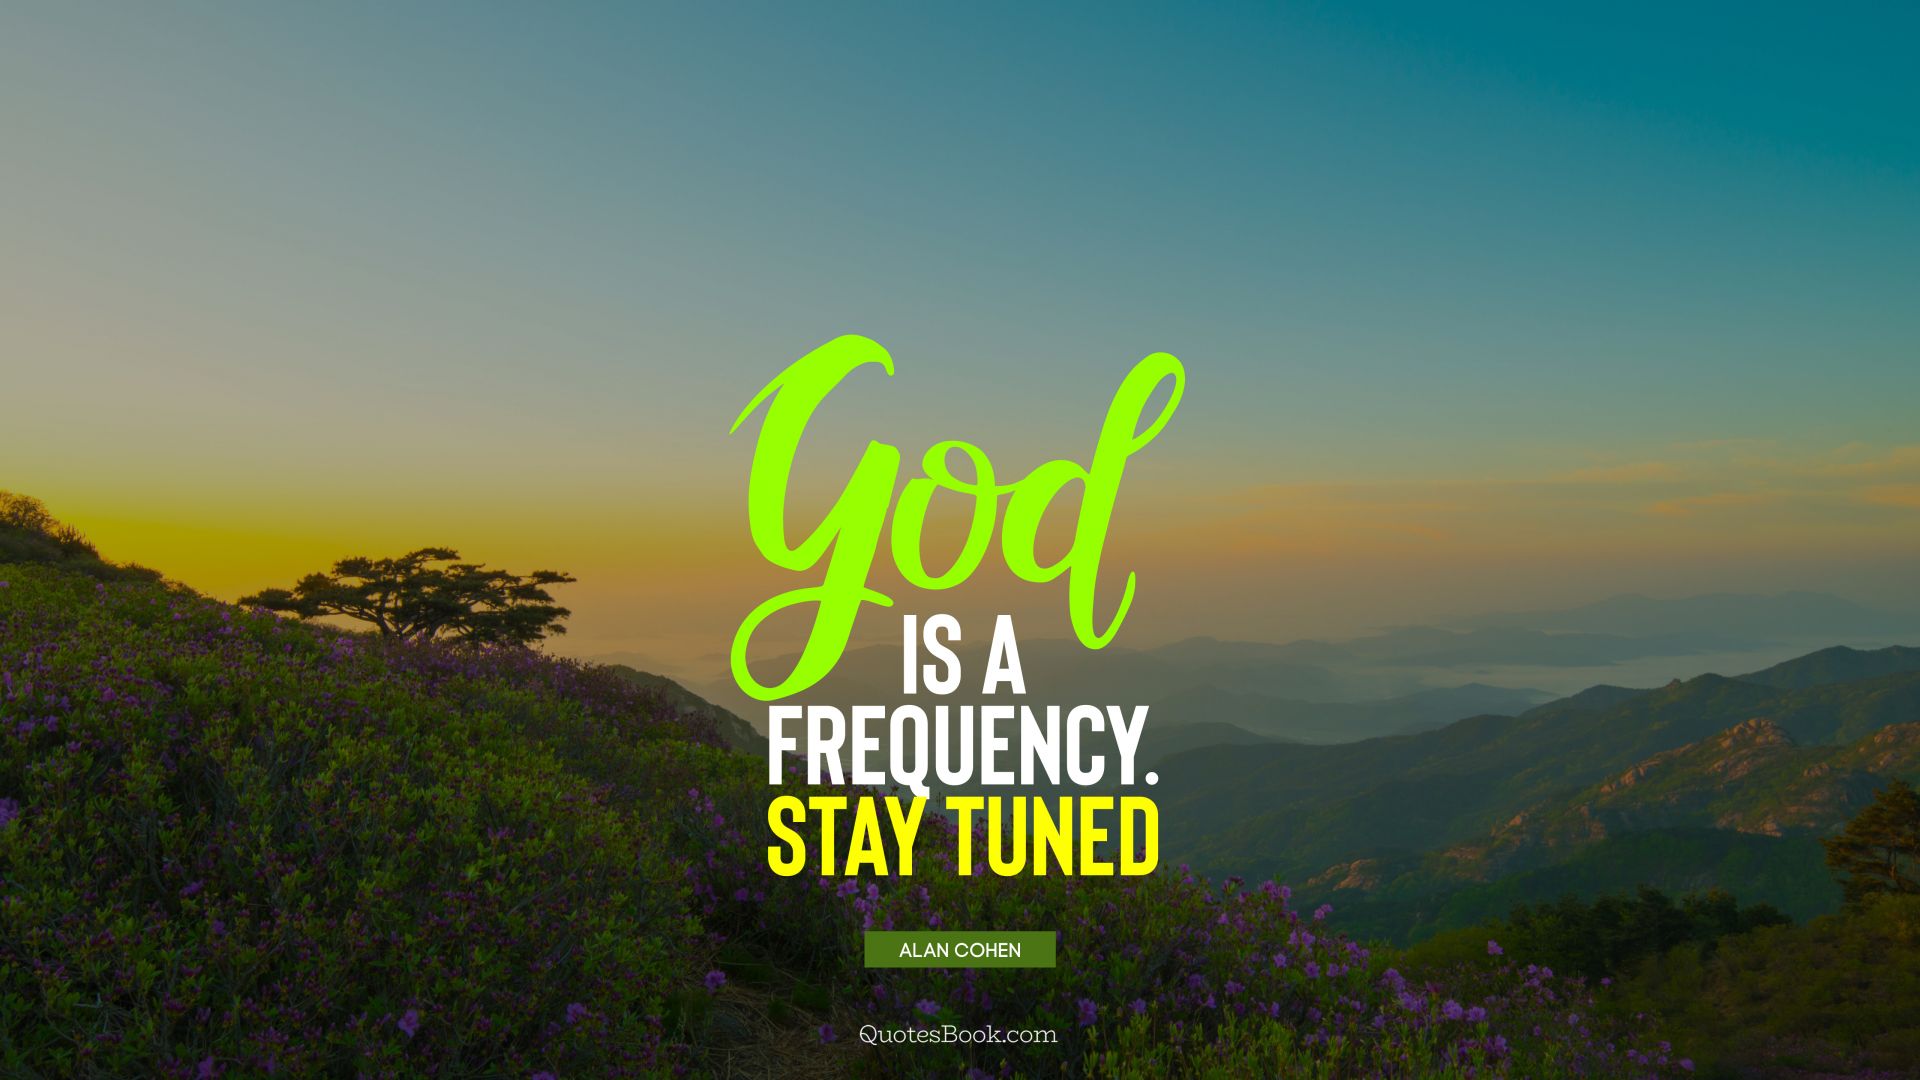 God is a frequency. Stay tuned. - Quote by Alan Cohen